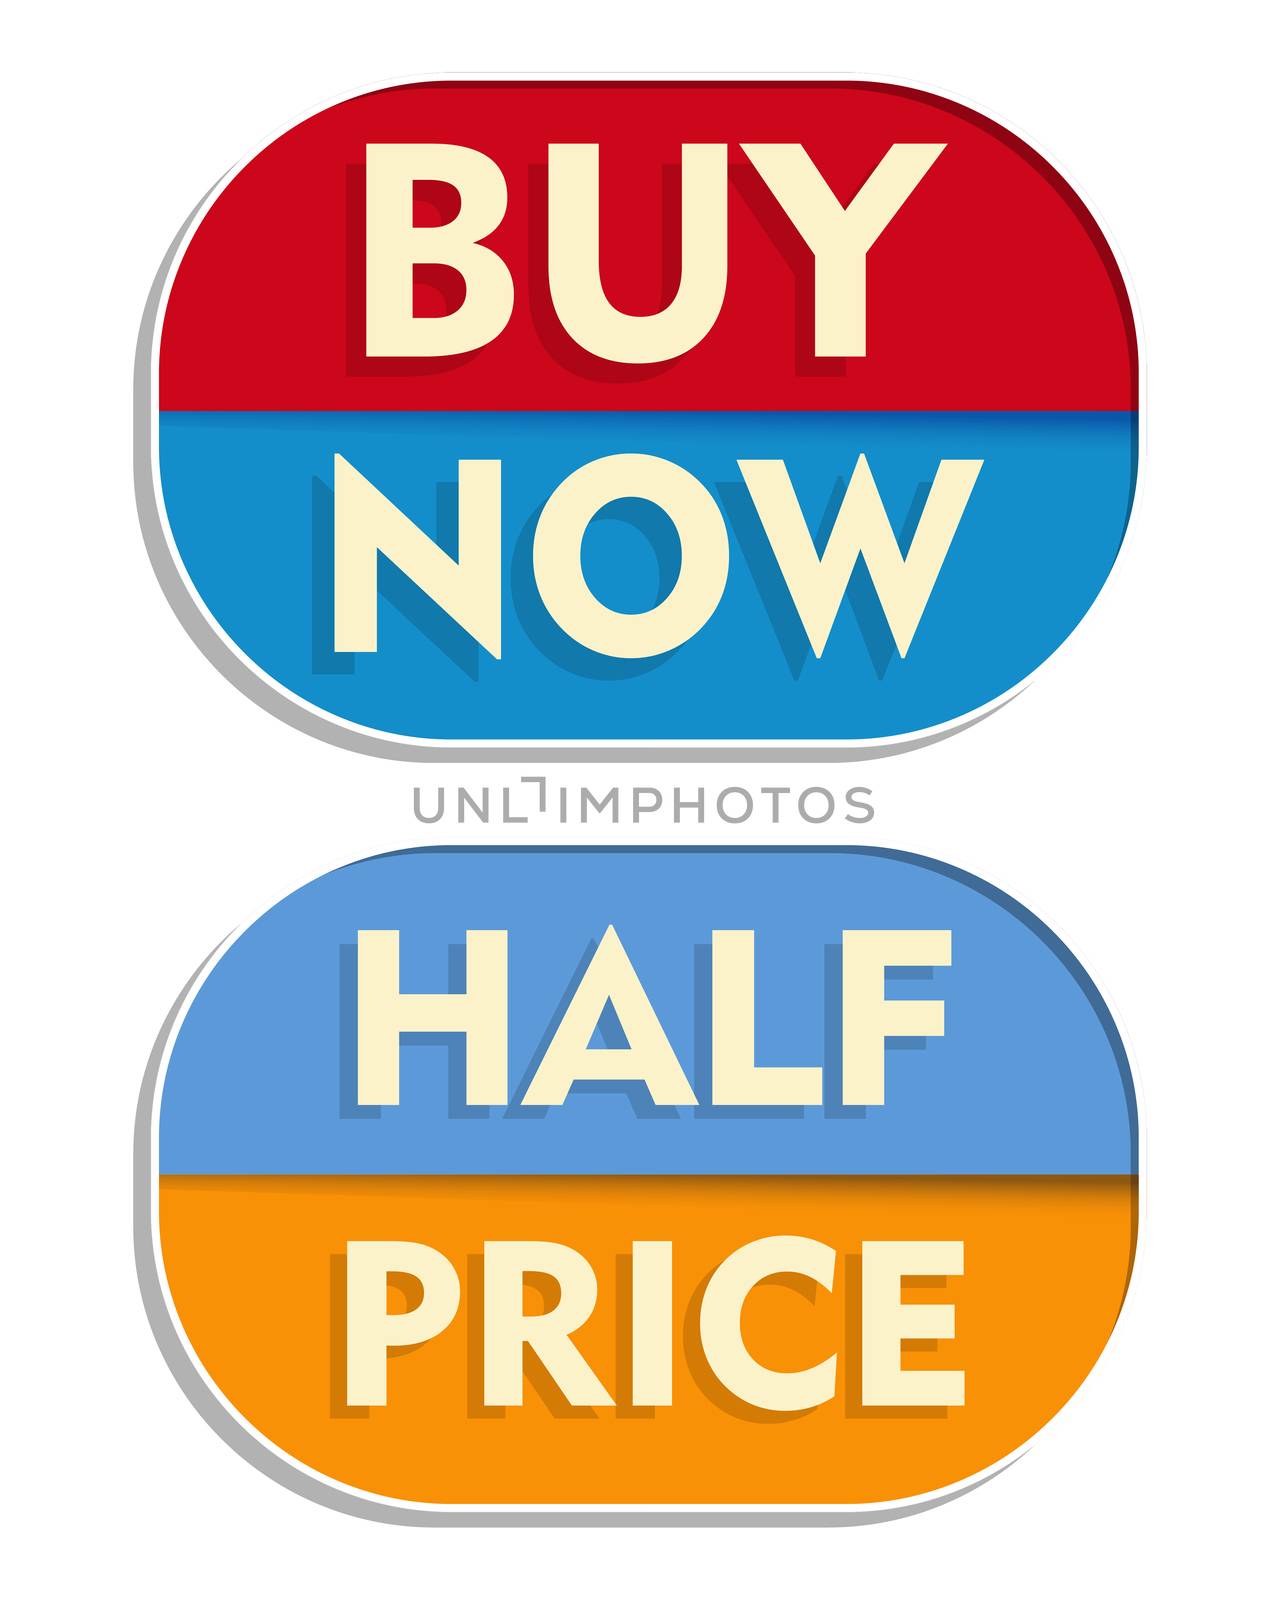 buy now and half price, two elliptical labels by marinini